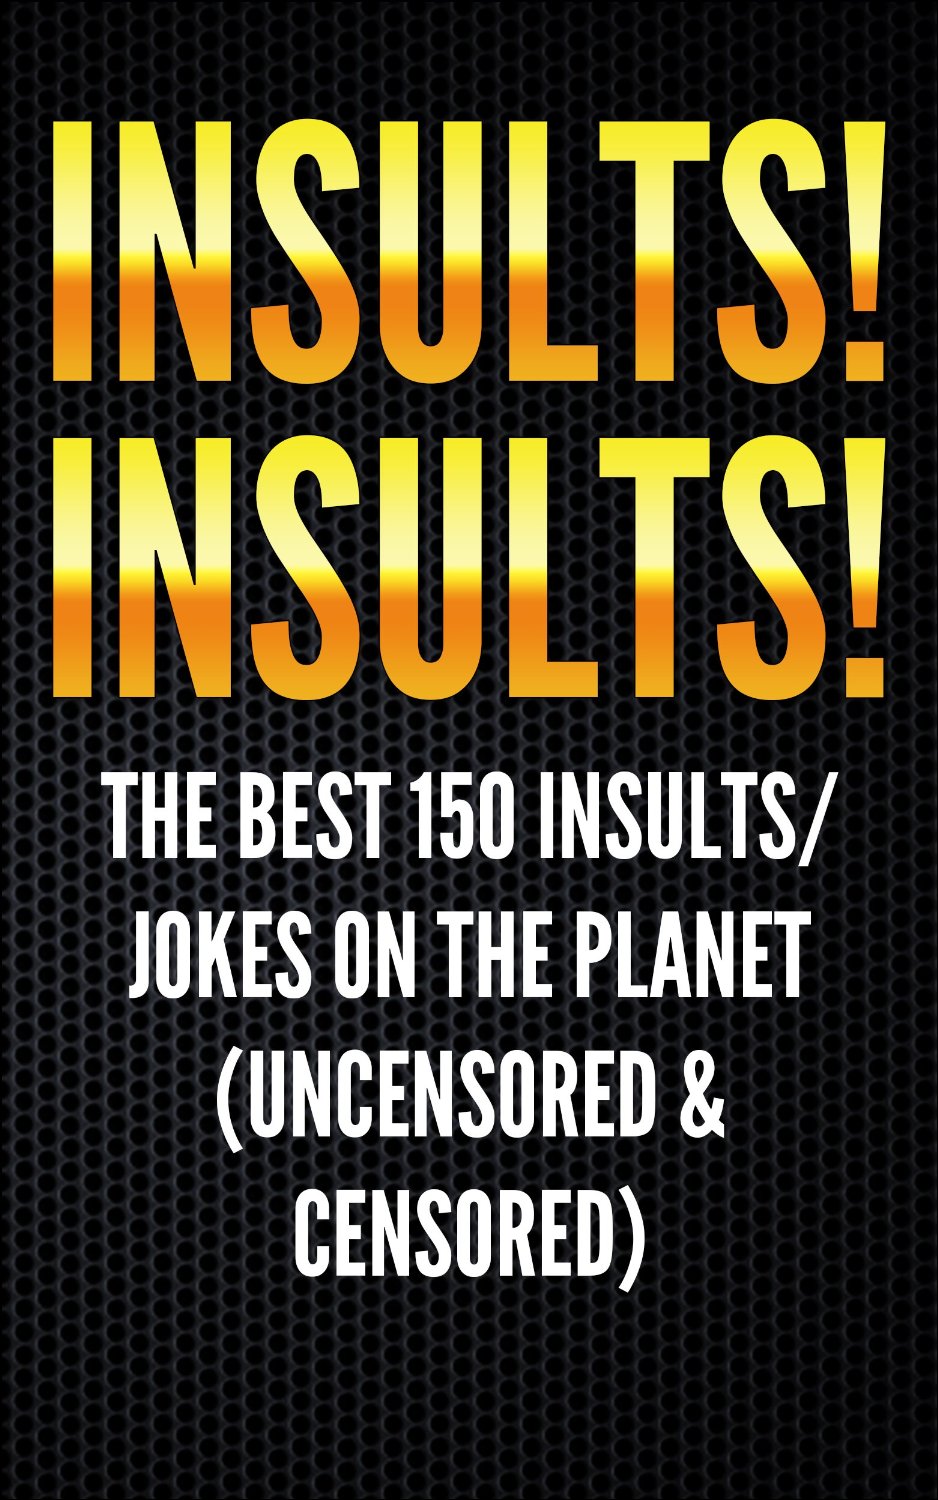 Insults! Insults! The Best 150 Insults/Jokes on the Planet by The Moma Factory